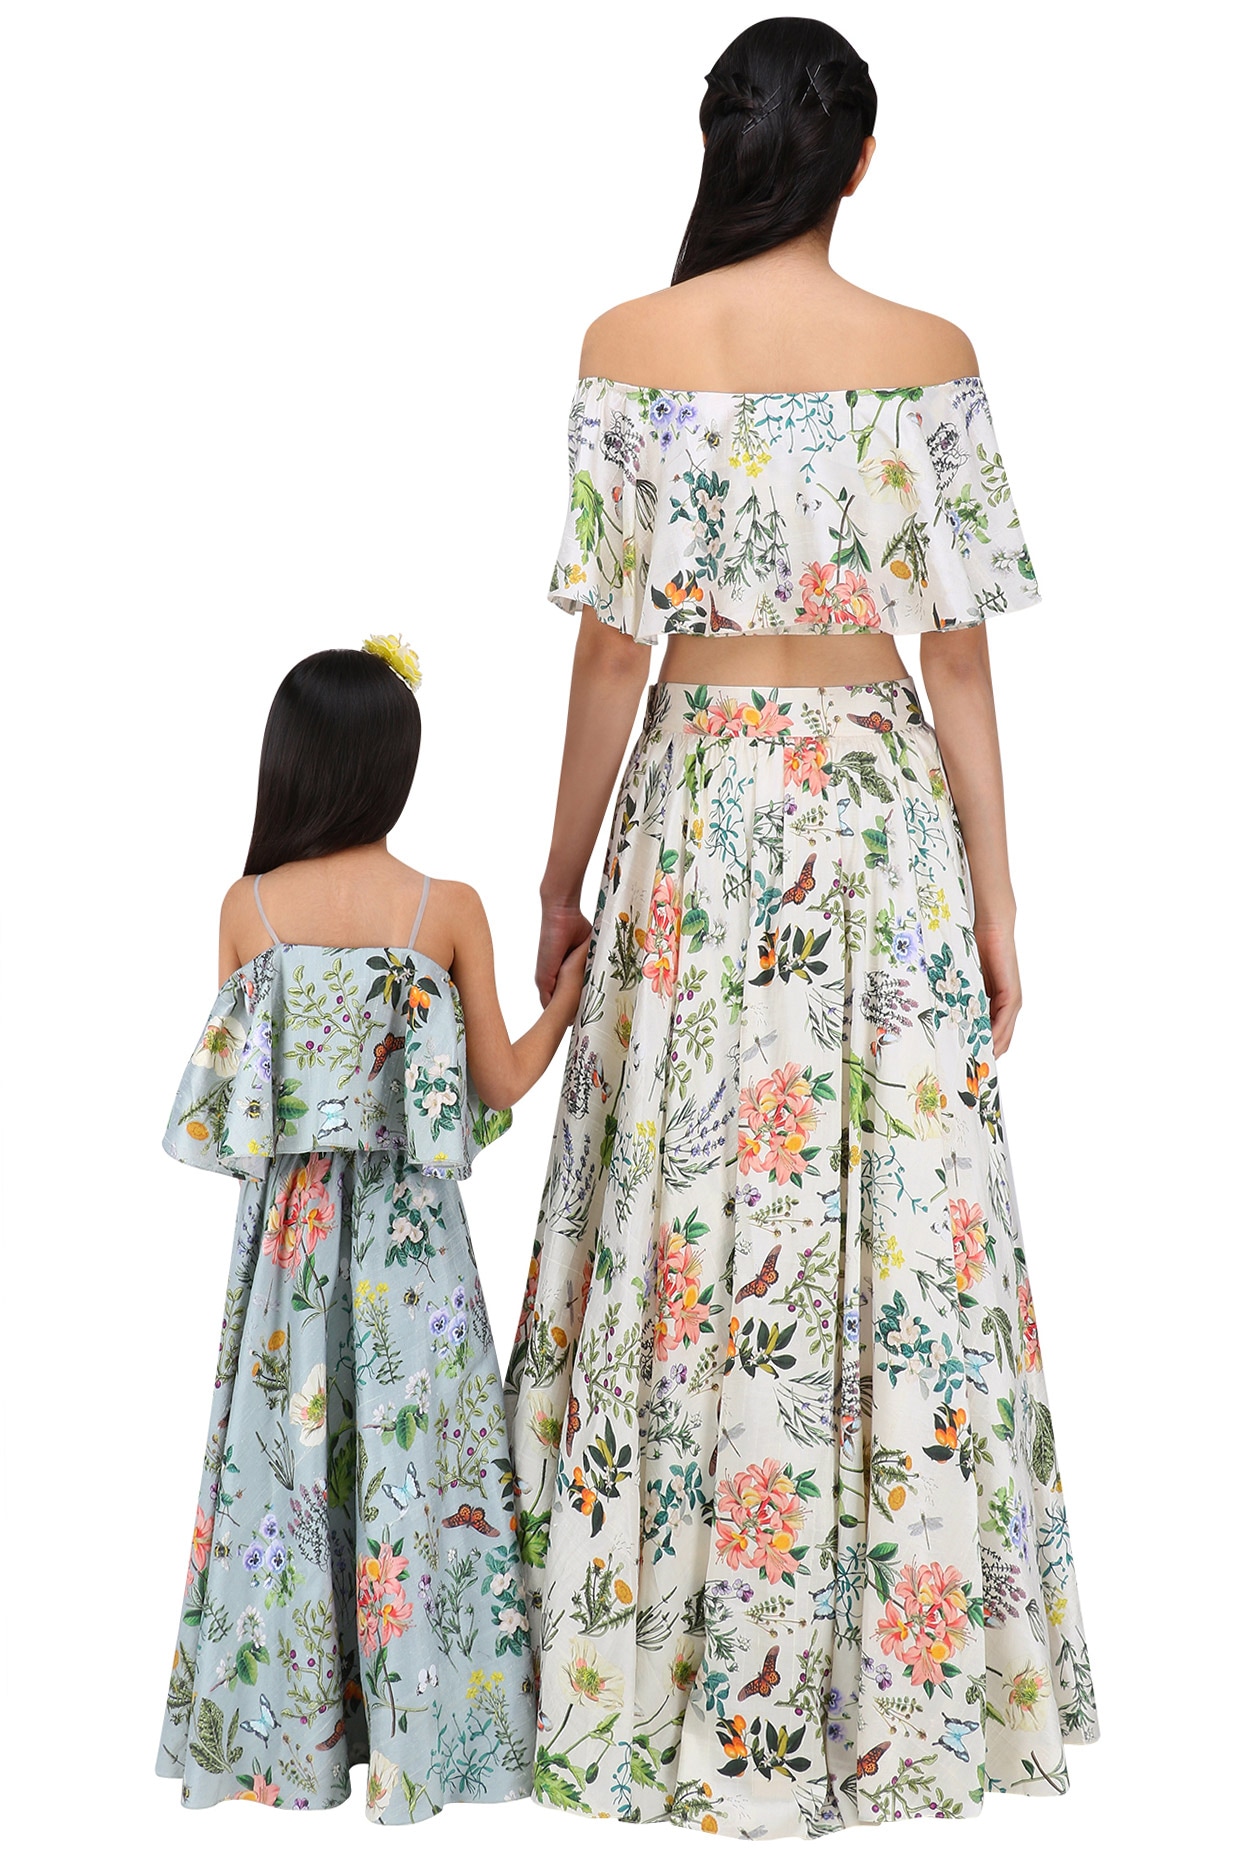 How to rock the Mom Daughter matching dresses!!!